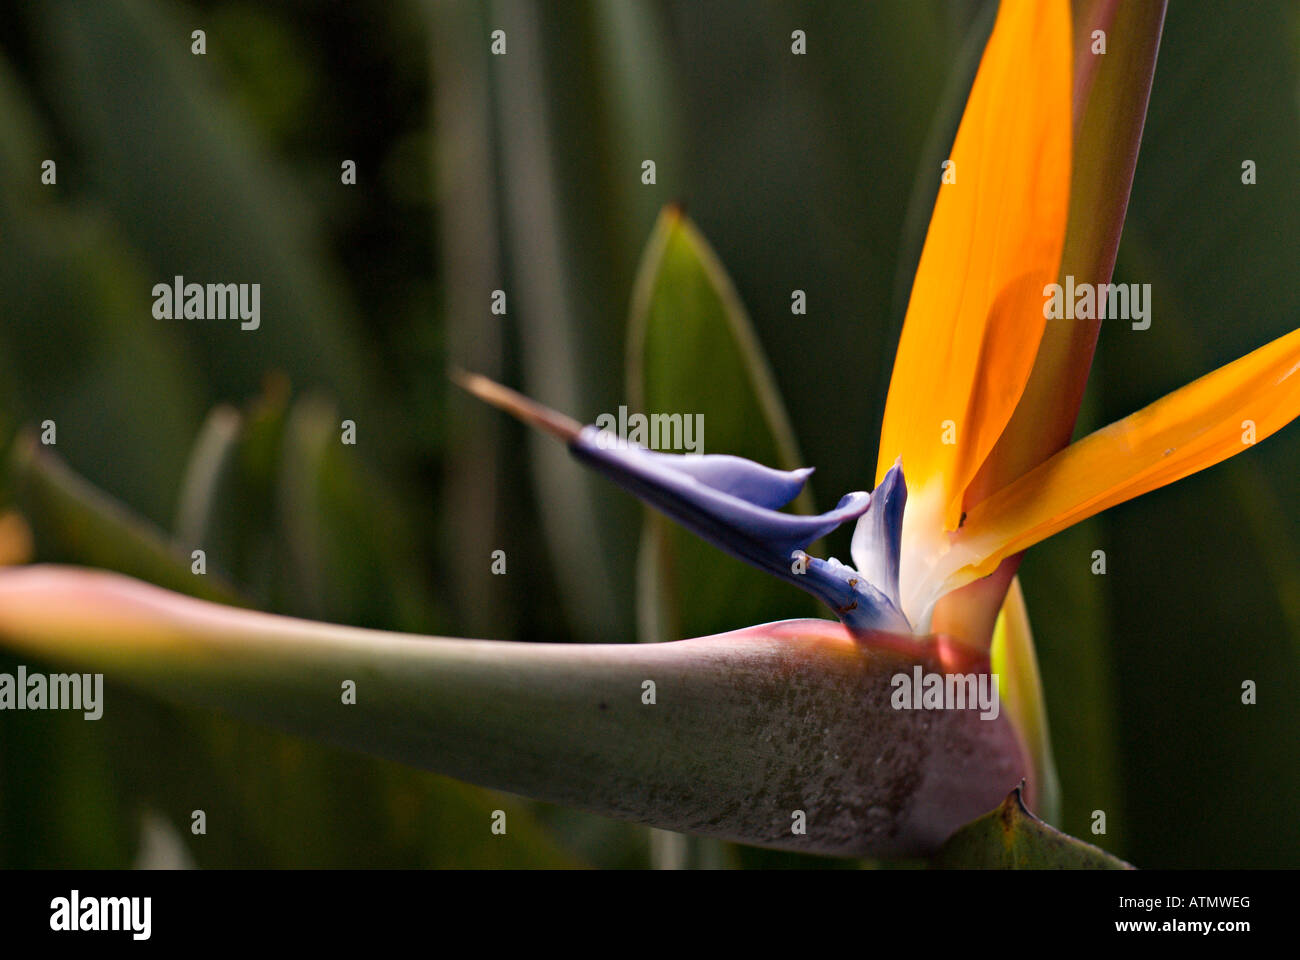 Heliconia flower, Colombia, South America Stock Photo